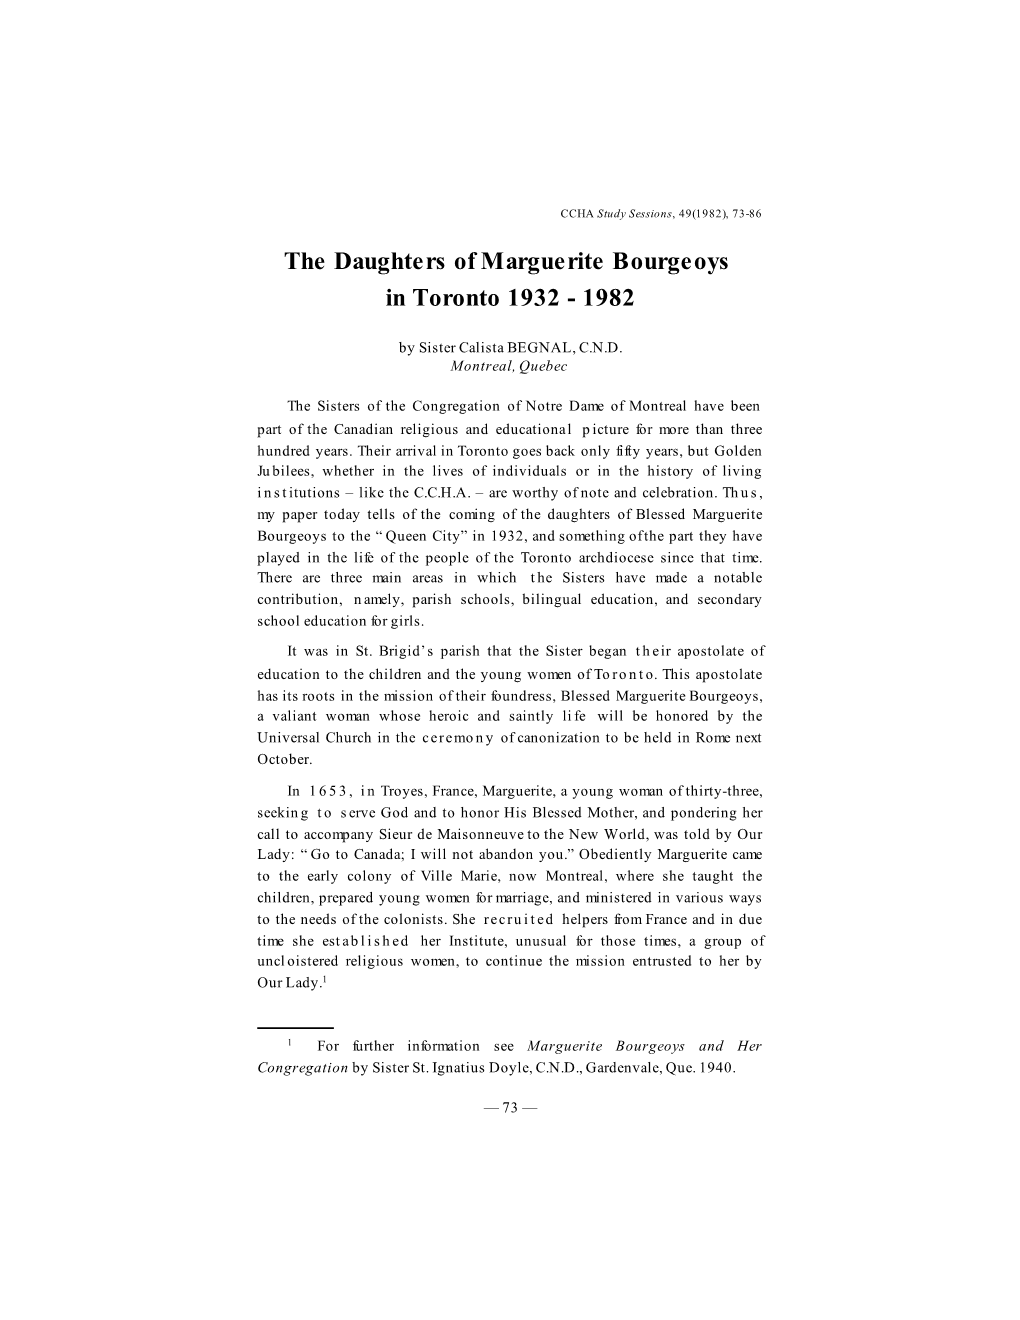 The Daughters of Marguerite Bourgeoys in Toronto 1932 - 1982